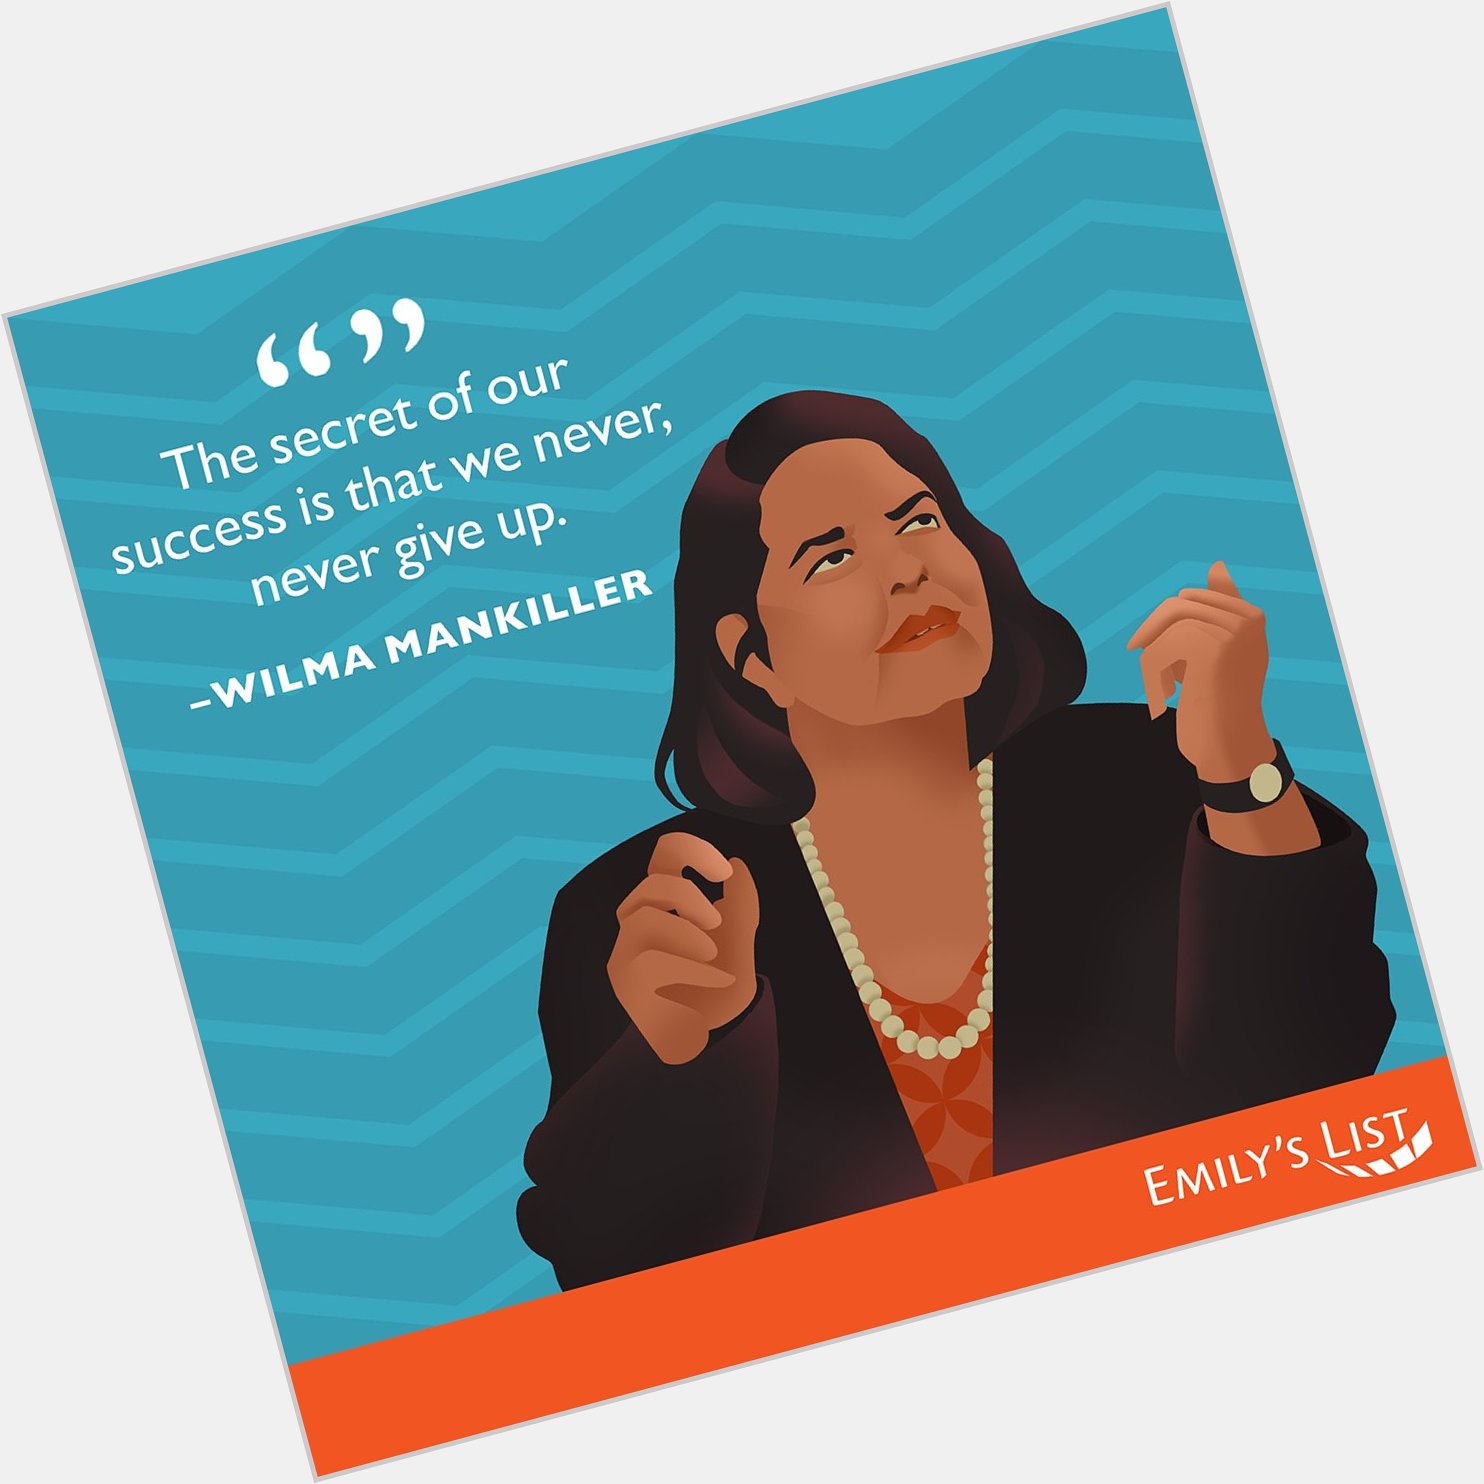 Emilyslist: Happy birthday to Wilma Mankiller, the first woman elected principal chief of the Cherokee Nation! 